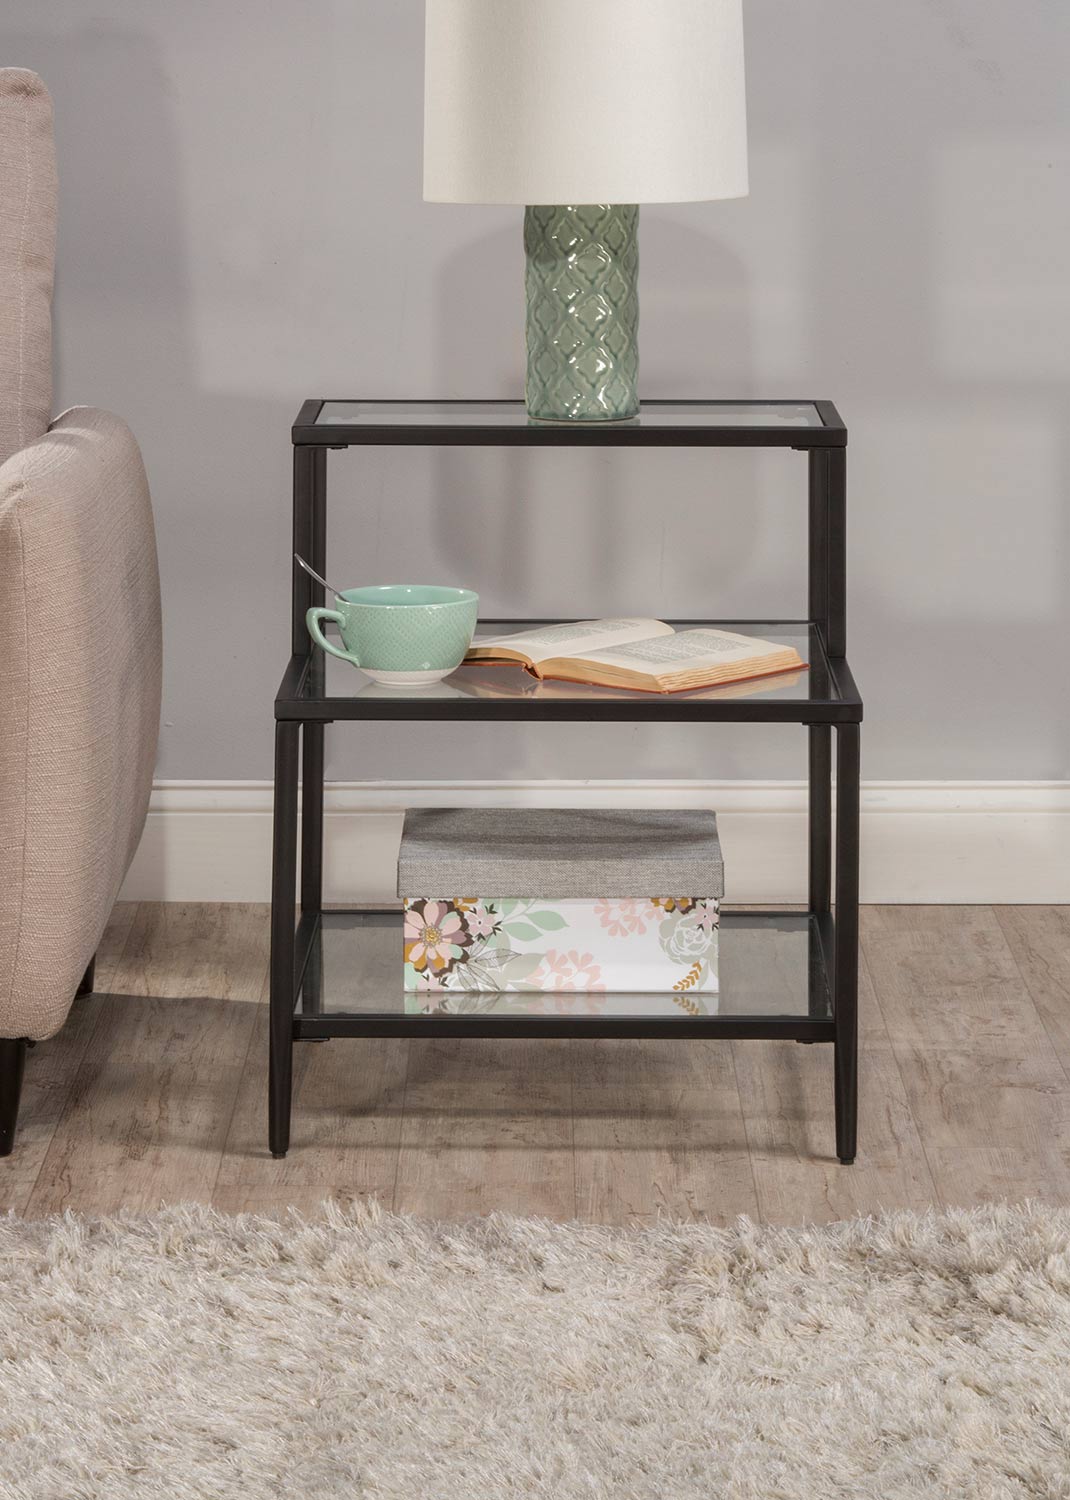 Hillsdale Harlan 3-Tier End Table with 2-Large and 1-Small Glass Shelves - Black